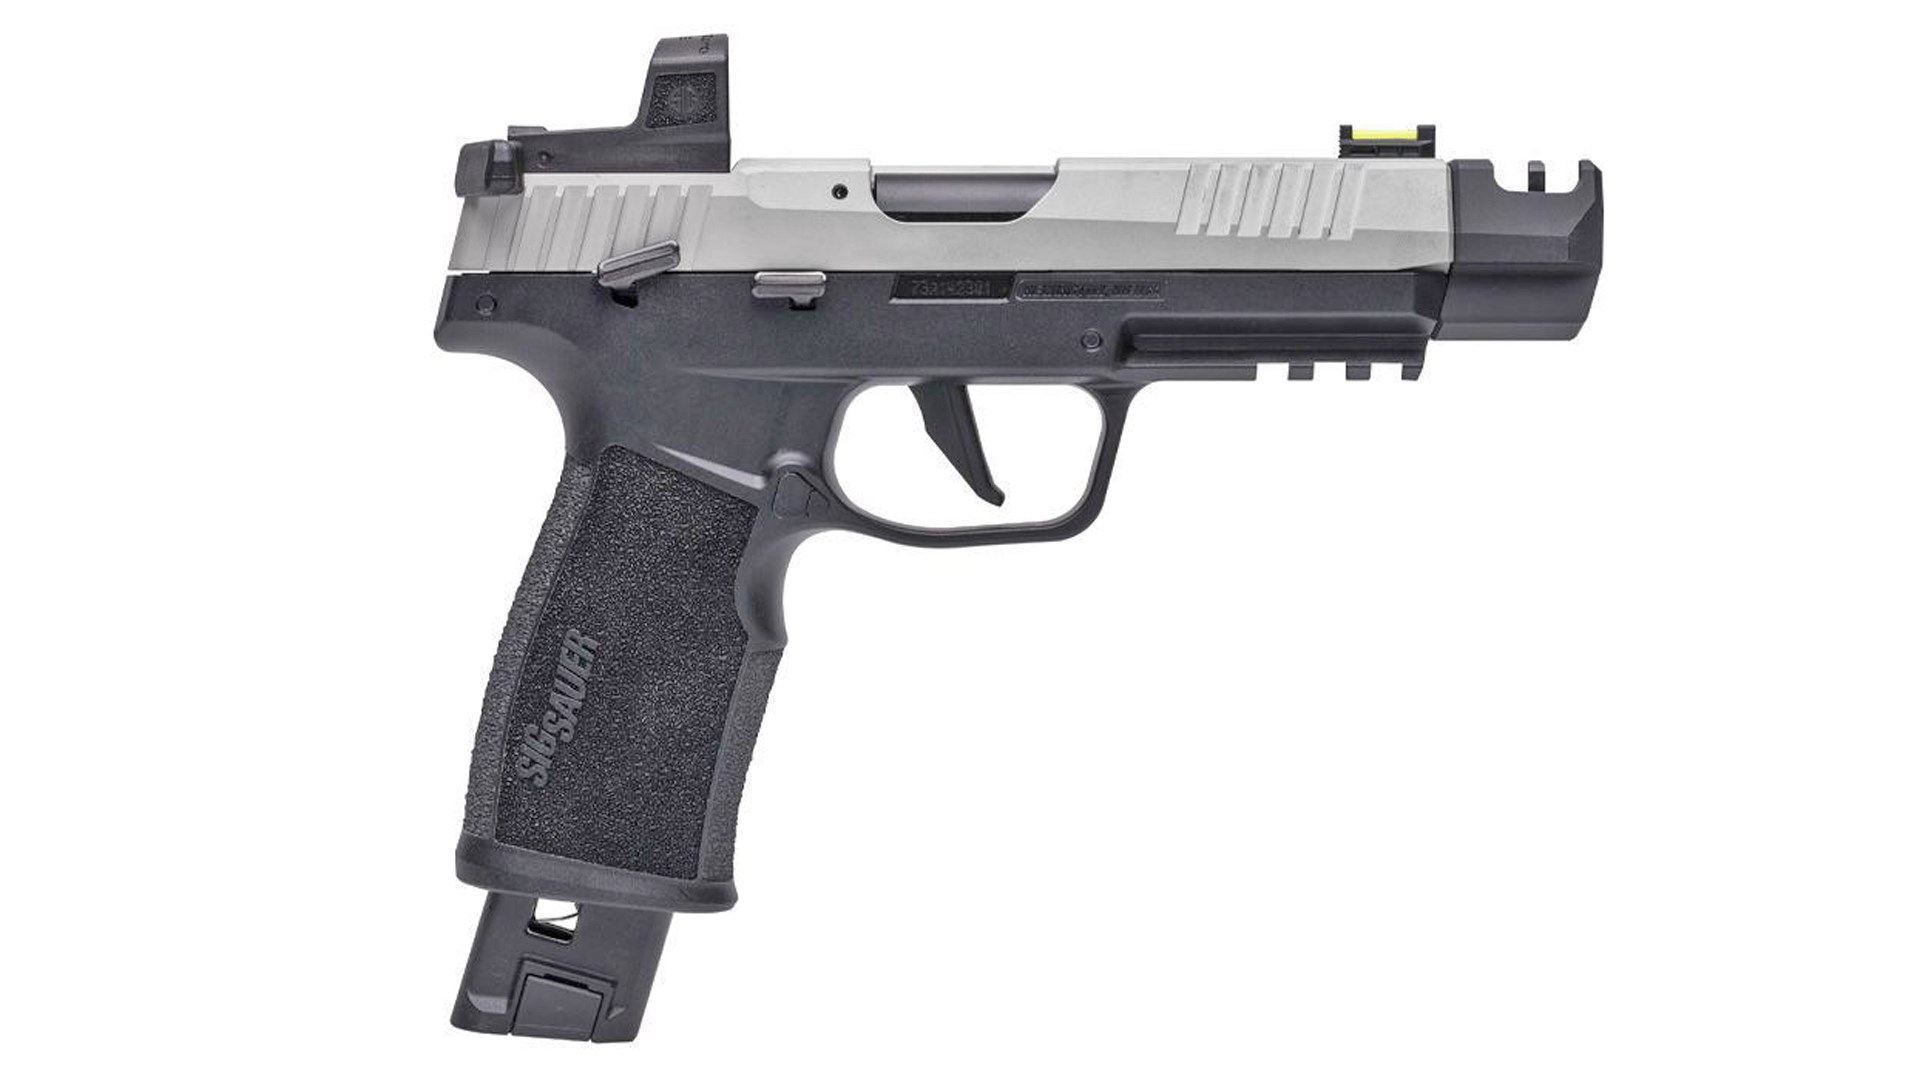 Right side of the SIG Sauer P322-COMP pistol.